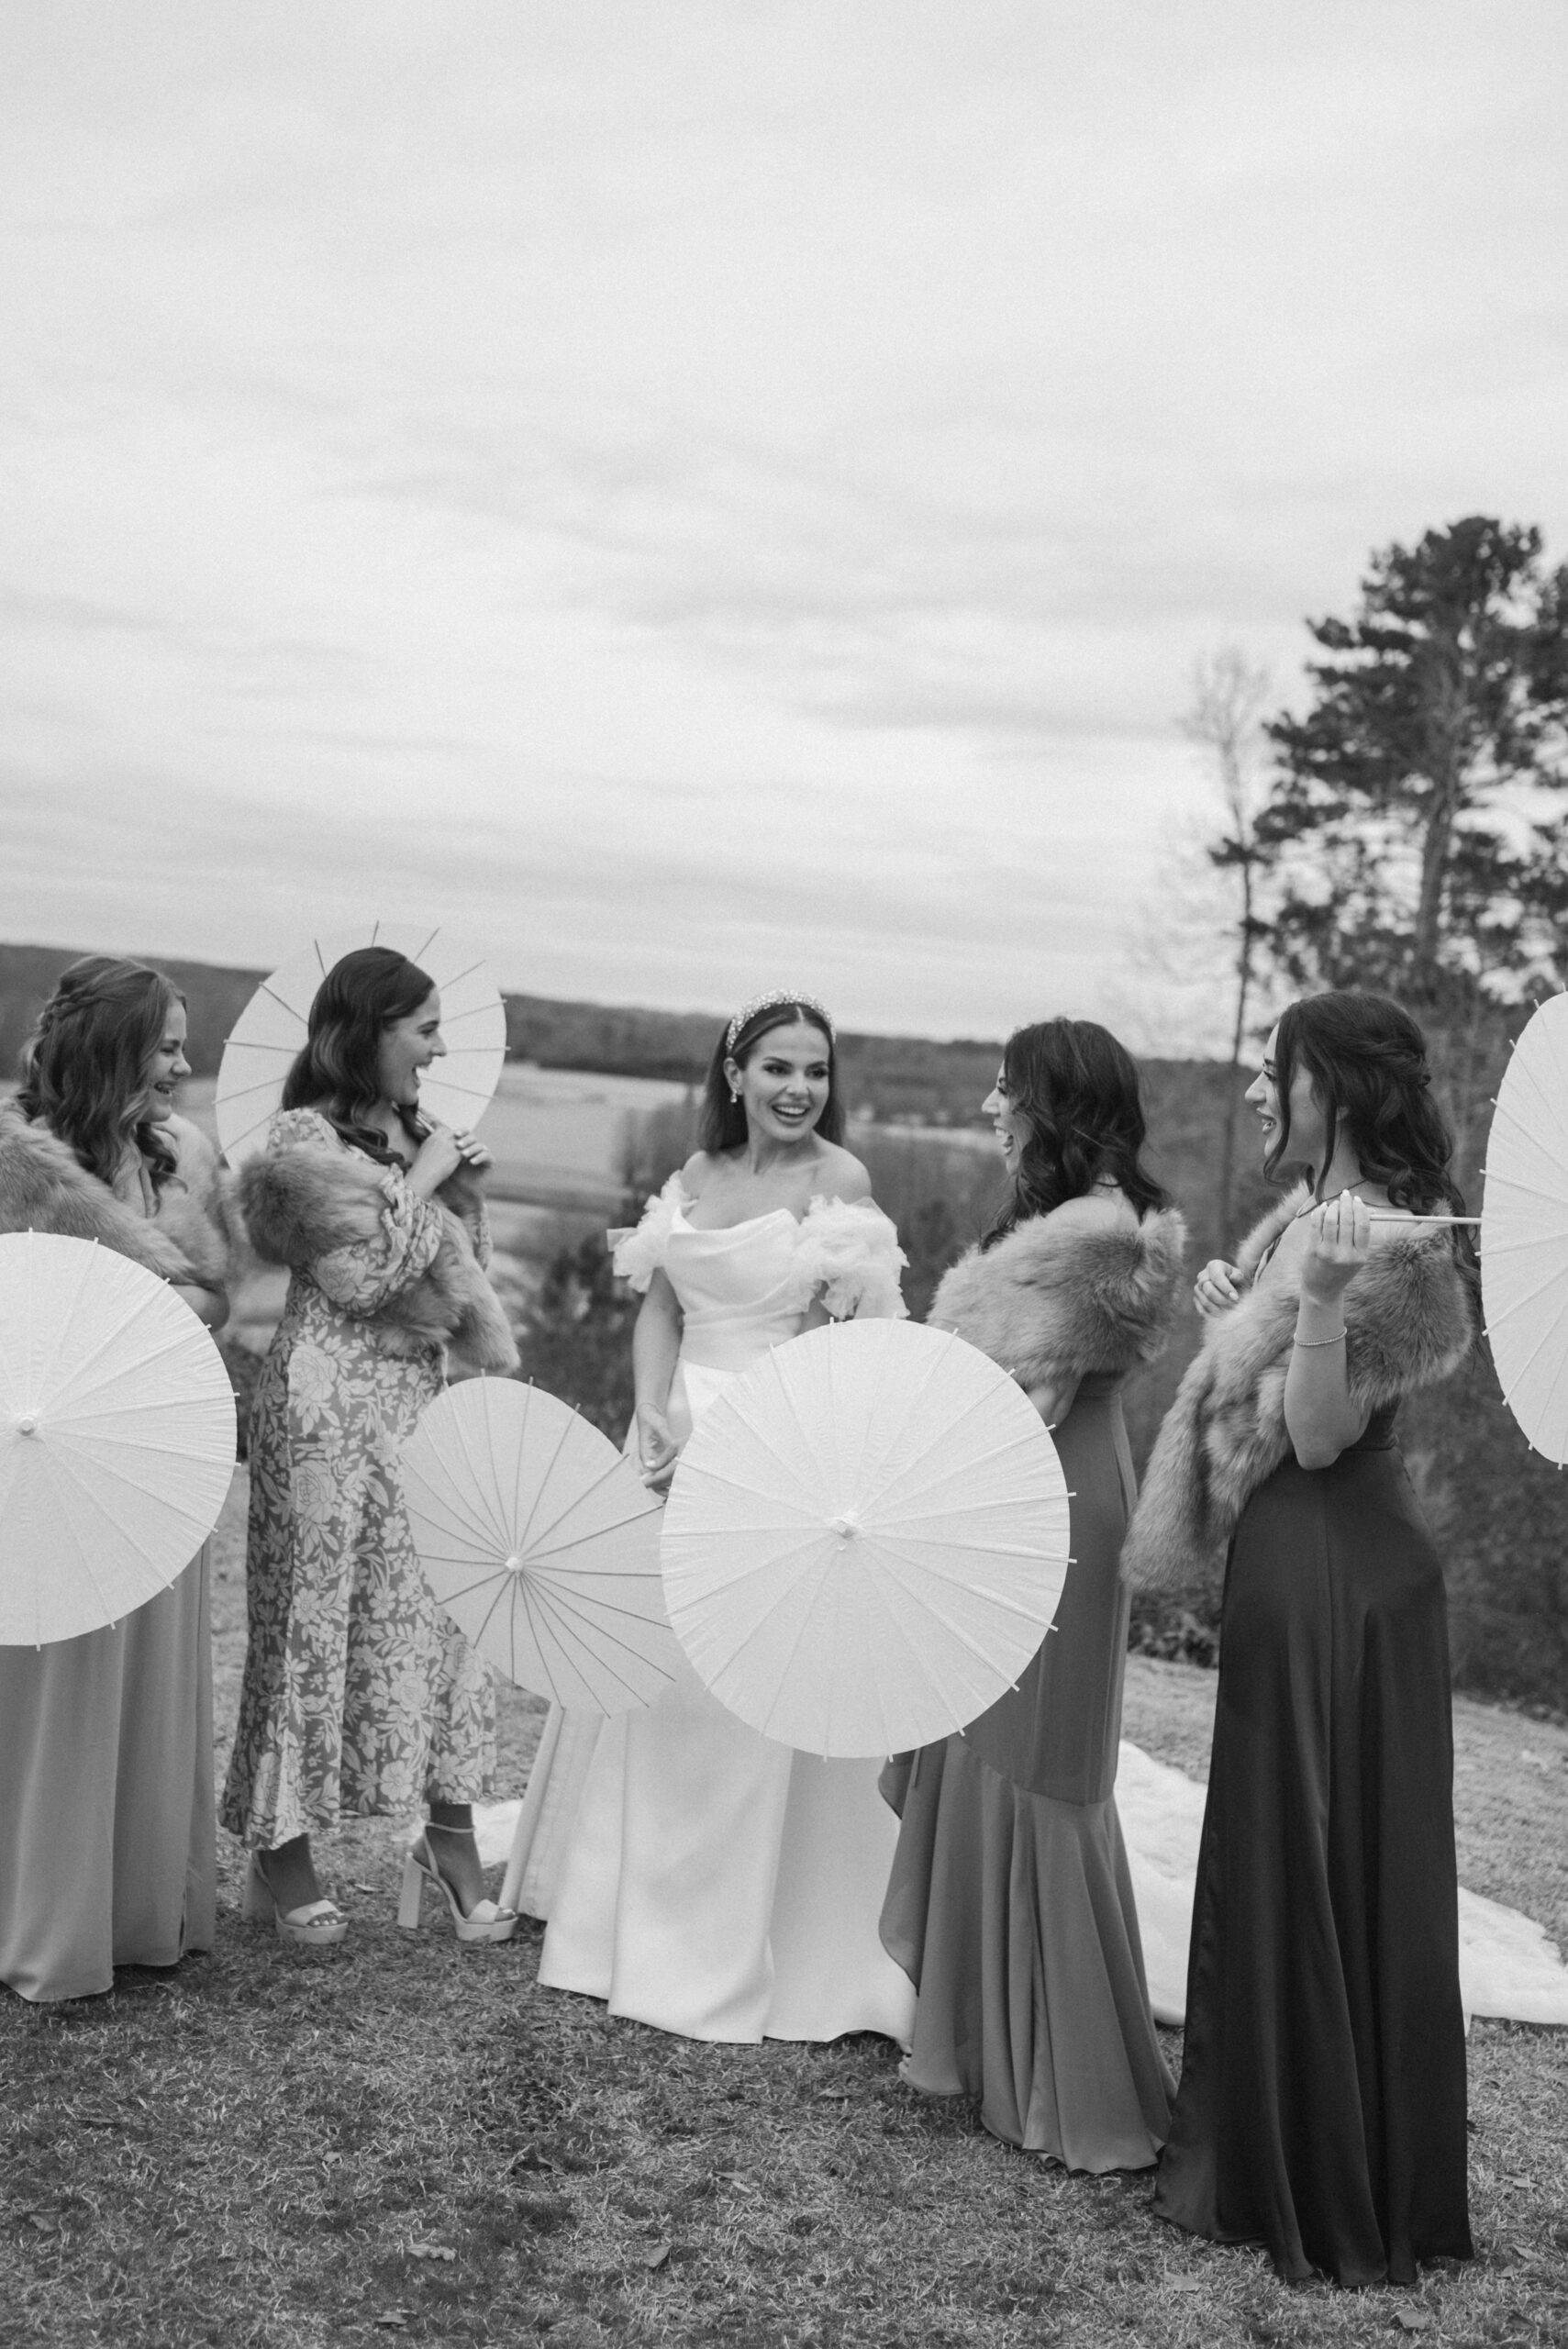 These bridesmaid parasols were so modern and brought a garden party feel to a cold December wedding at Foxhall Resort. | Megan Kuhn Photography